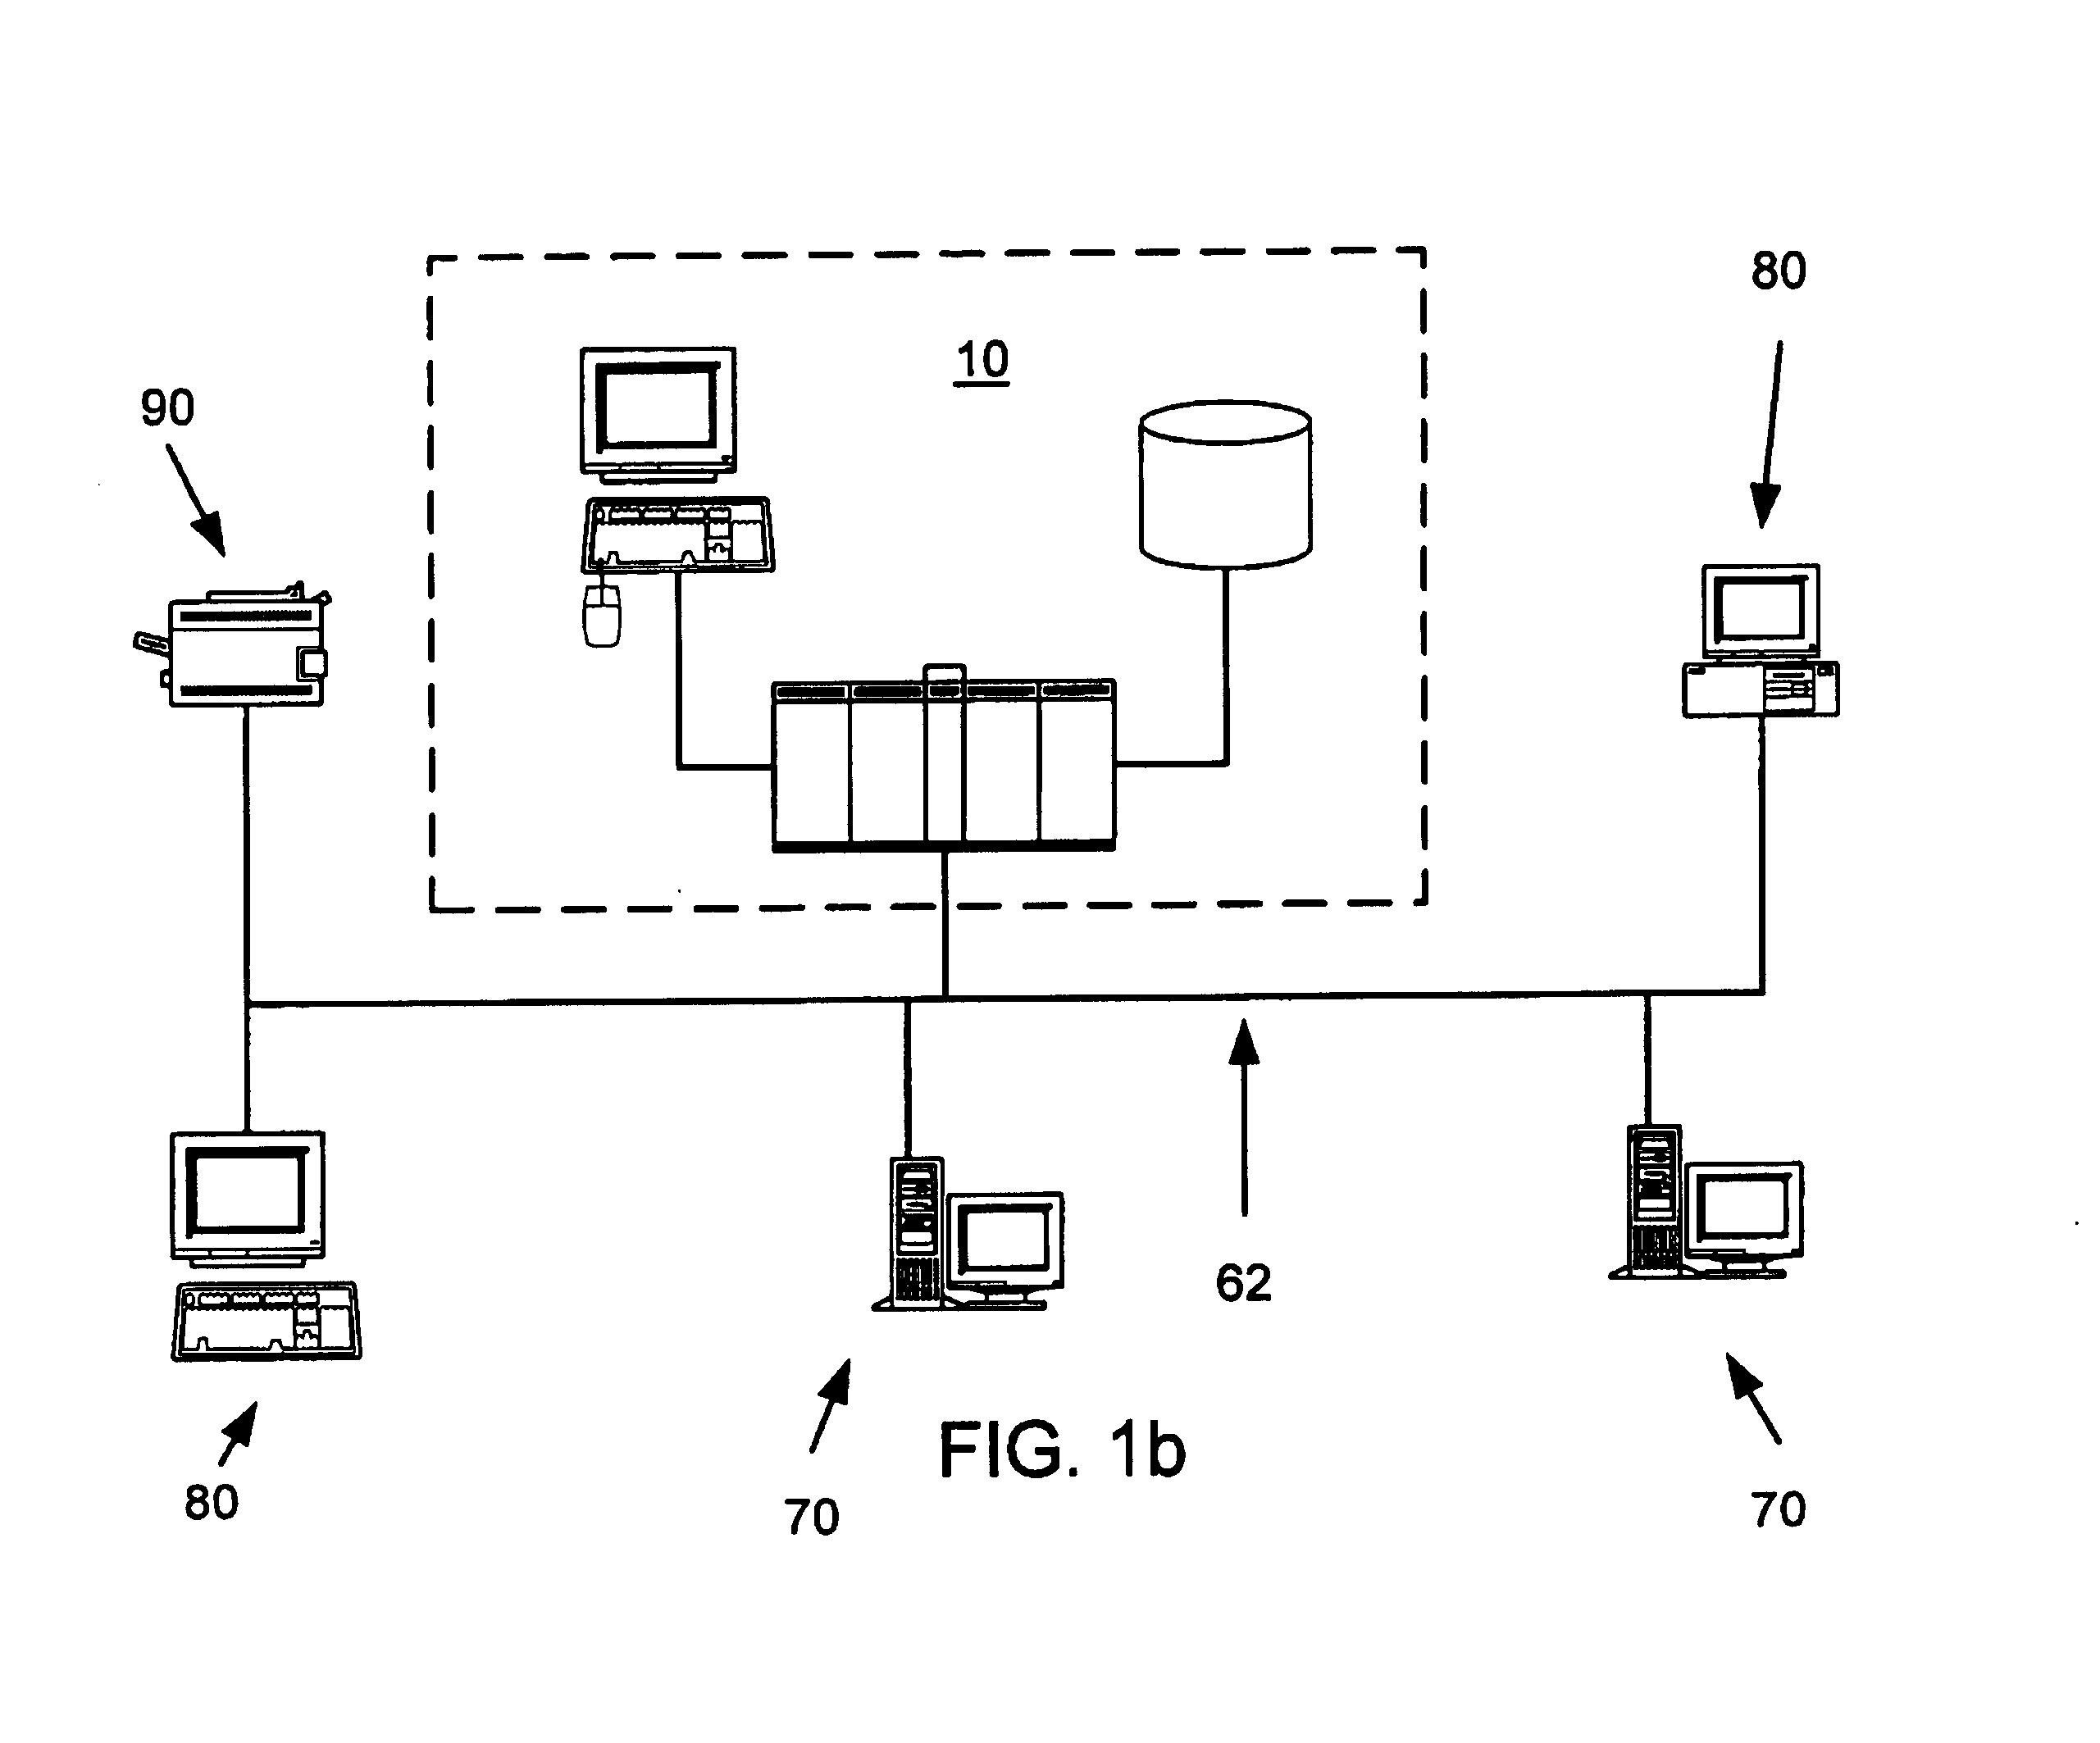 Graphical user interface with a hide/show feature for a reference system in an insurance claims processing system